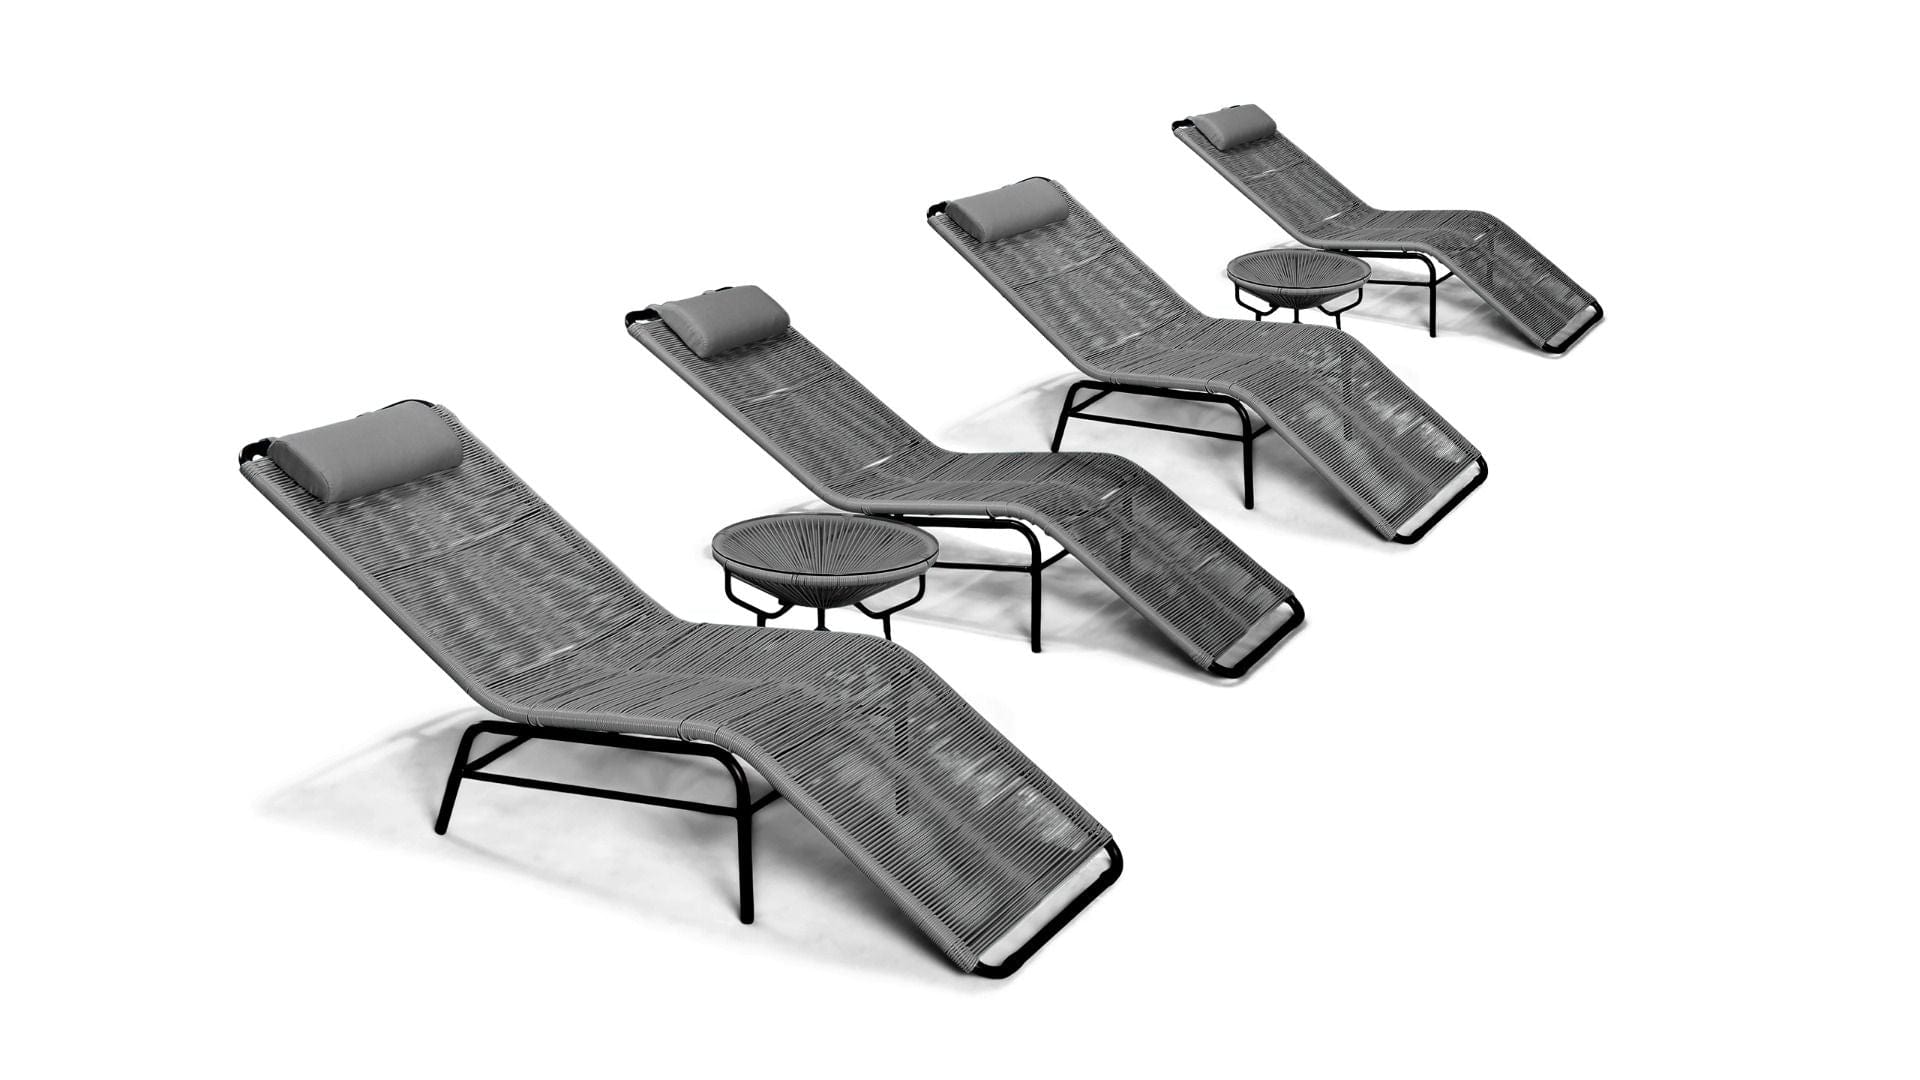 Harmonia Living Chaise Lounge Space Gray Harmonia Living - Acapulco 6 Piece Chaise Lounge Set - Two Table and Four Chaise Lounges | HL-ACA-6CLS